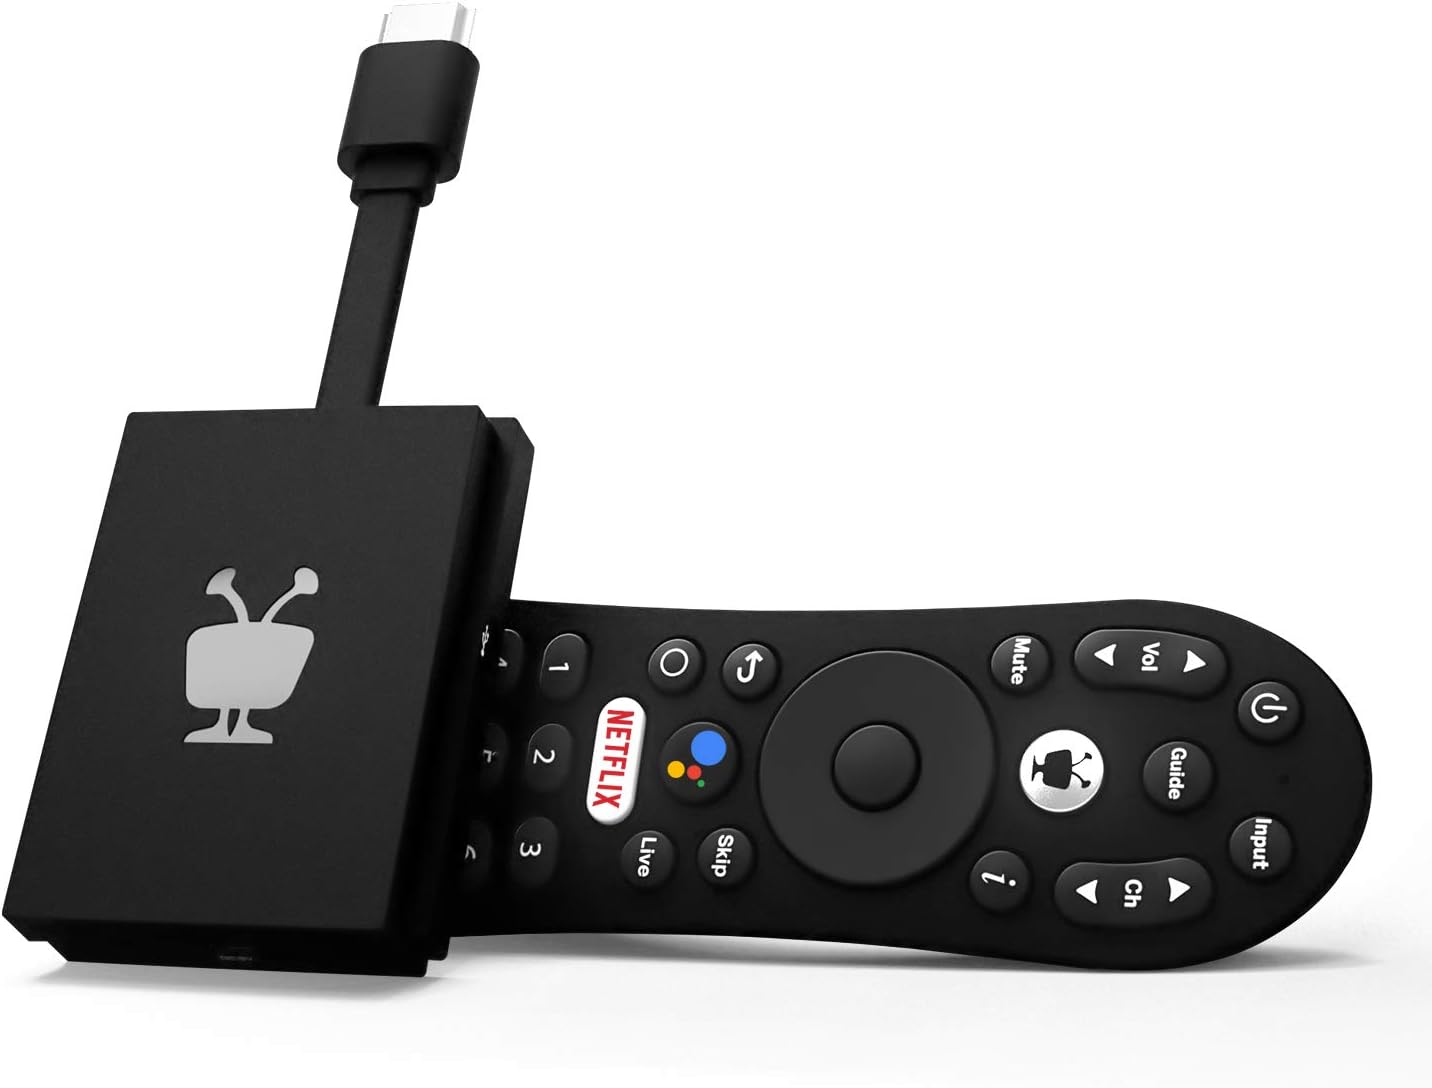 TiVo Stream 4K – Every Streaming App and Live TV on One Screen – 4K UHD, Dolby Vision HDR and Dolby Atmos Sound – Powered by Android TV – Plug - In Smart TV - Amazing Gadgets Outlet